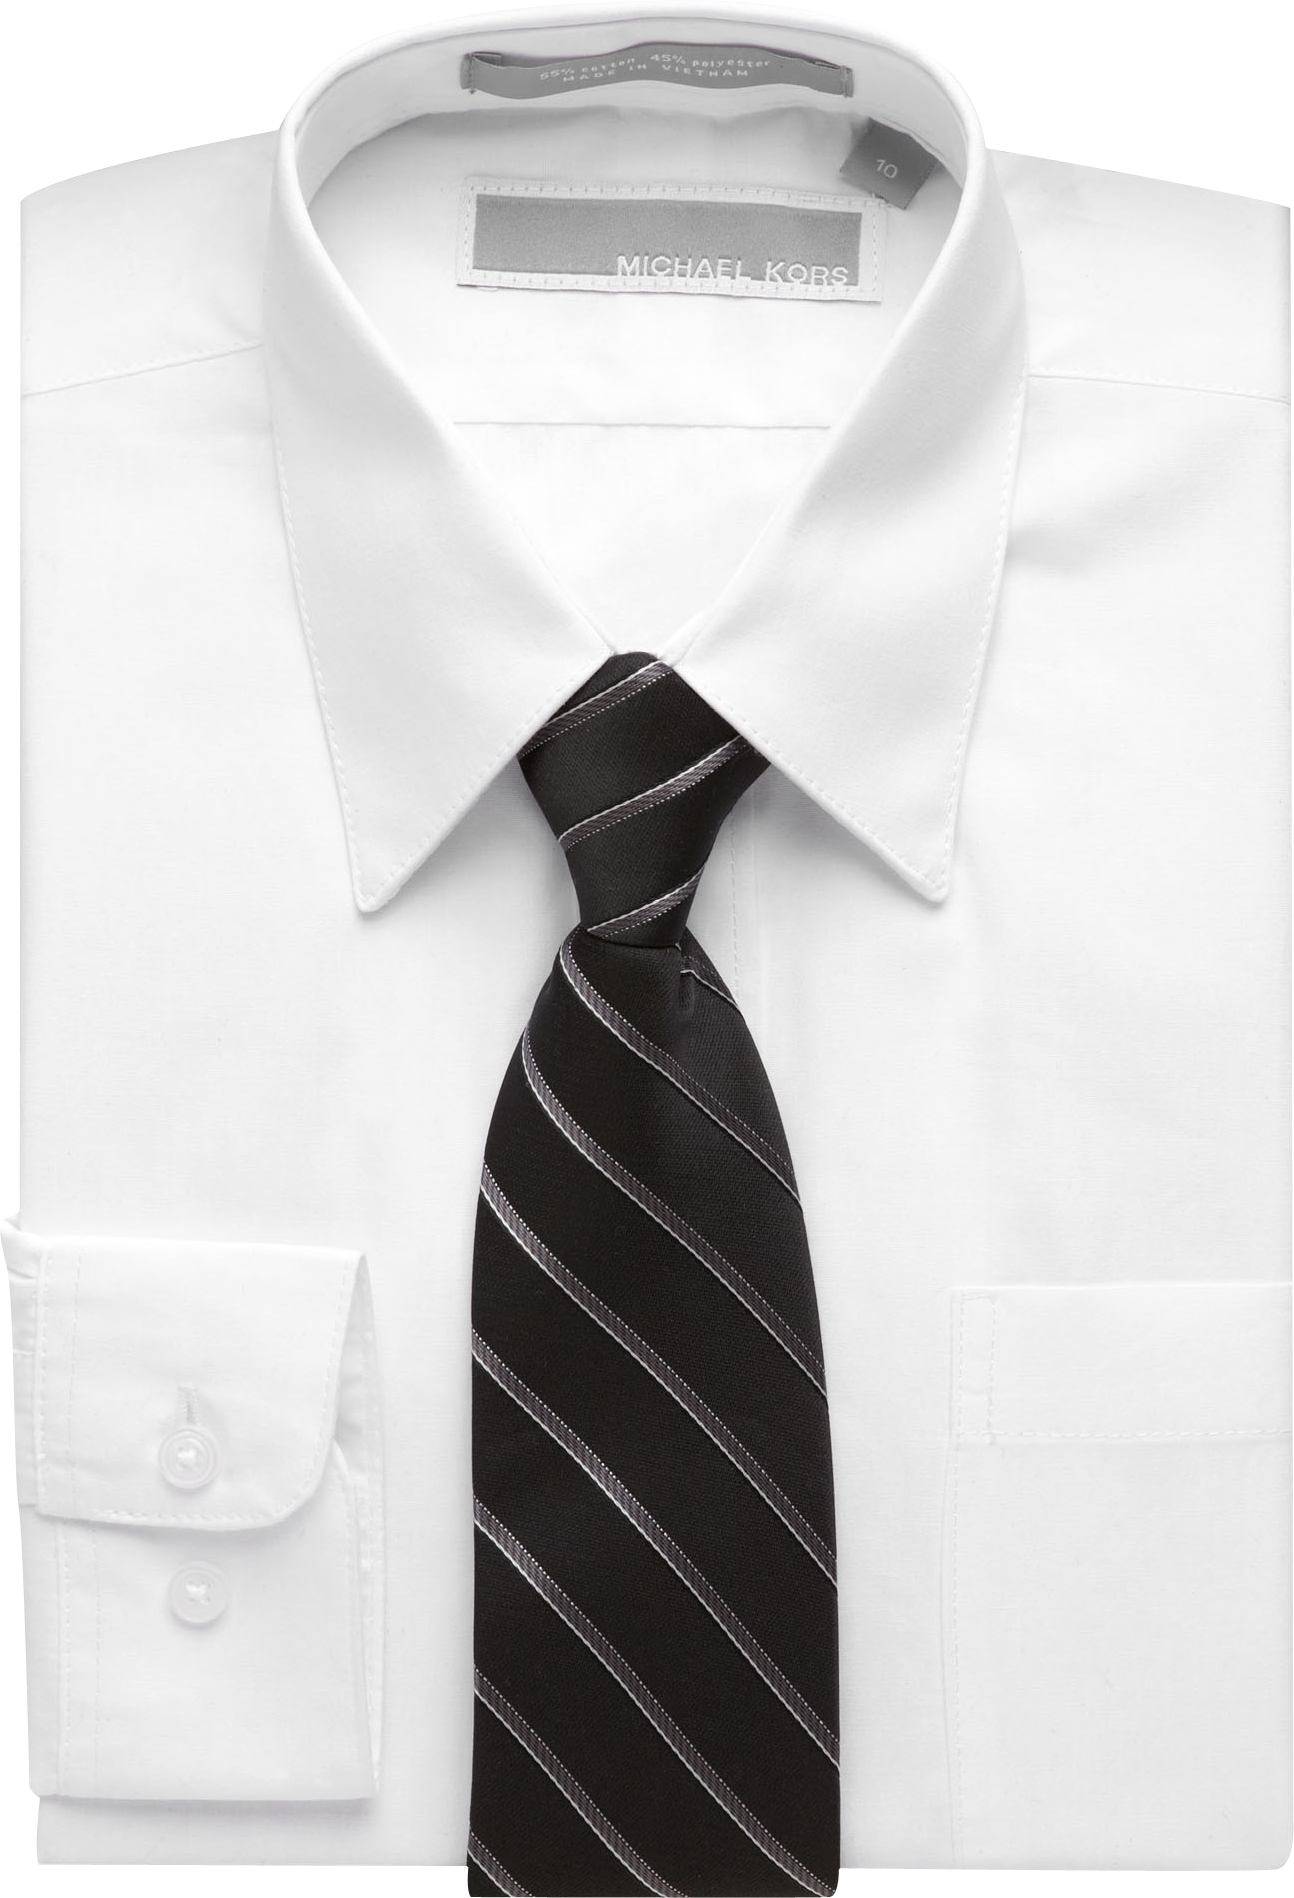 michael kors the shirt and tie collection